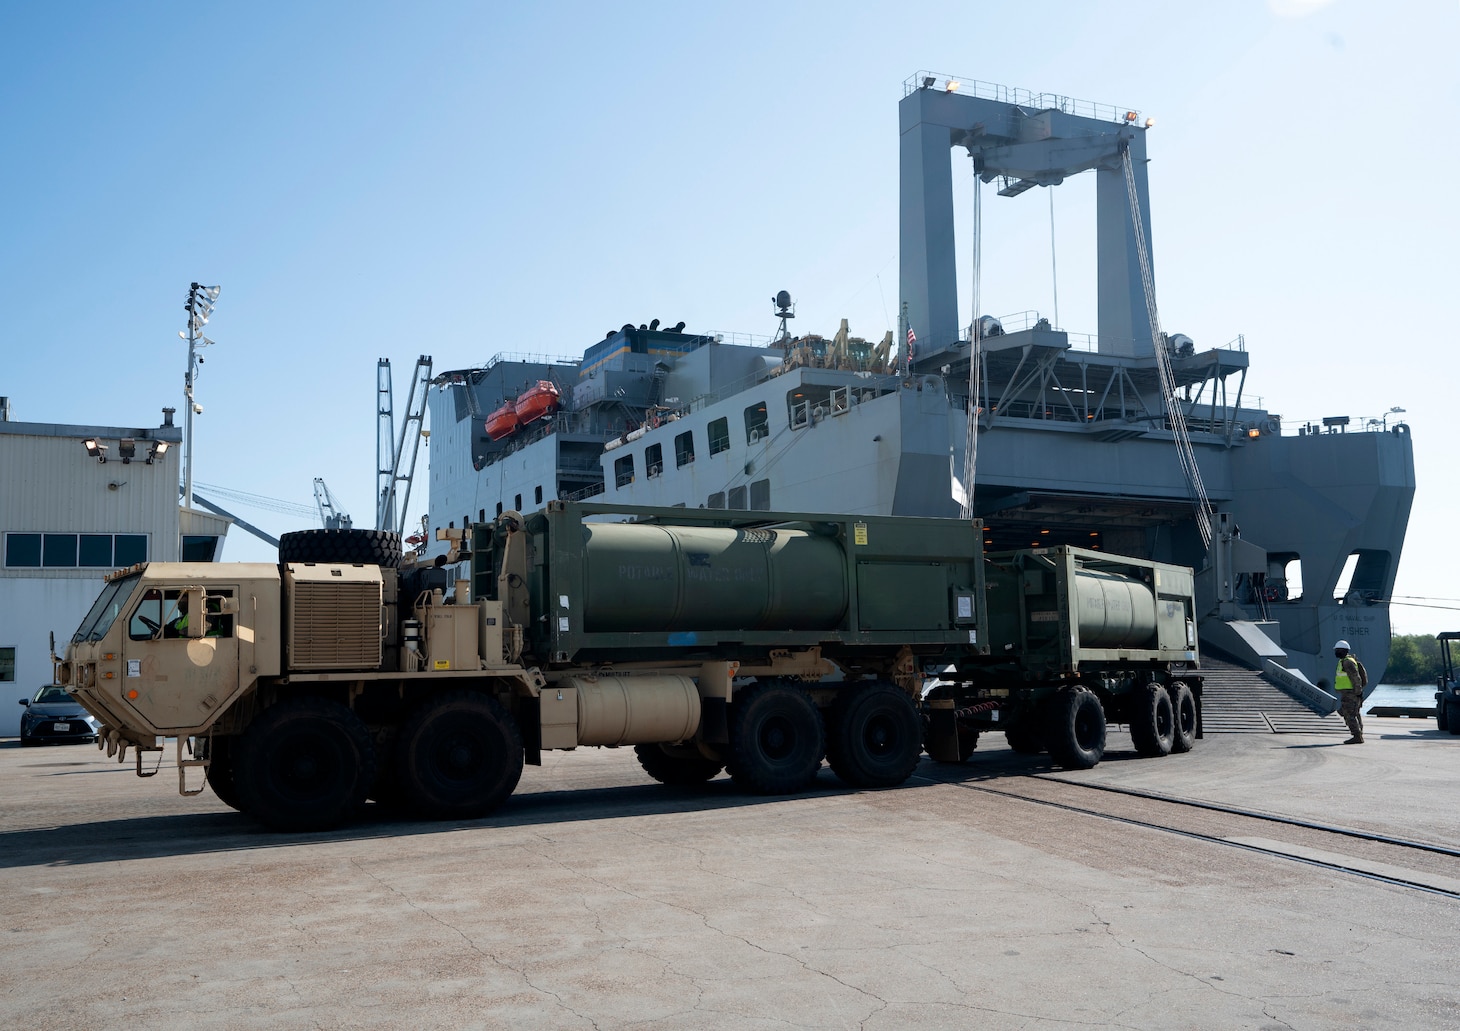 A M105 Load Handling System Compatible Water Tank Rack, (Hippo) leaves the Large, Medium- Speed, Roll-on/Roll-off Fisher ship after a download of cargo during the Joint Readiness Exercise 20, at the Port of Port Arthur, Texas, Sept. 26, 2020.